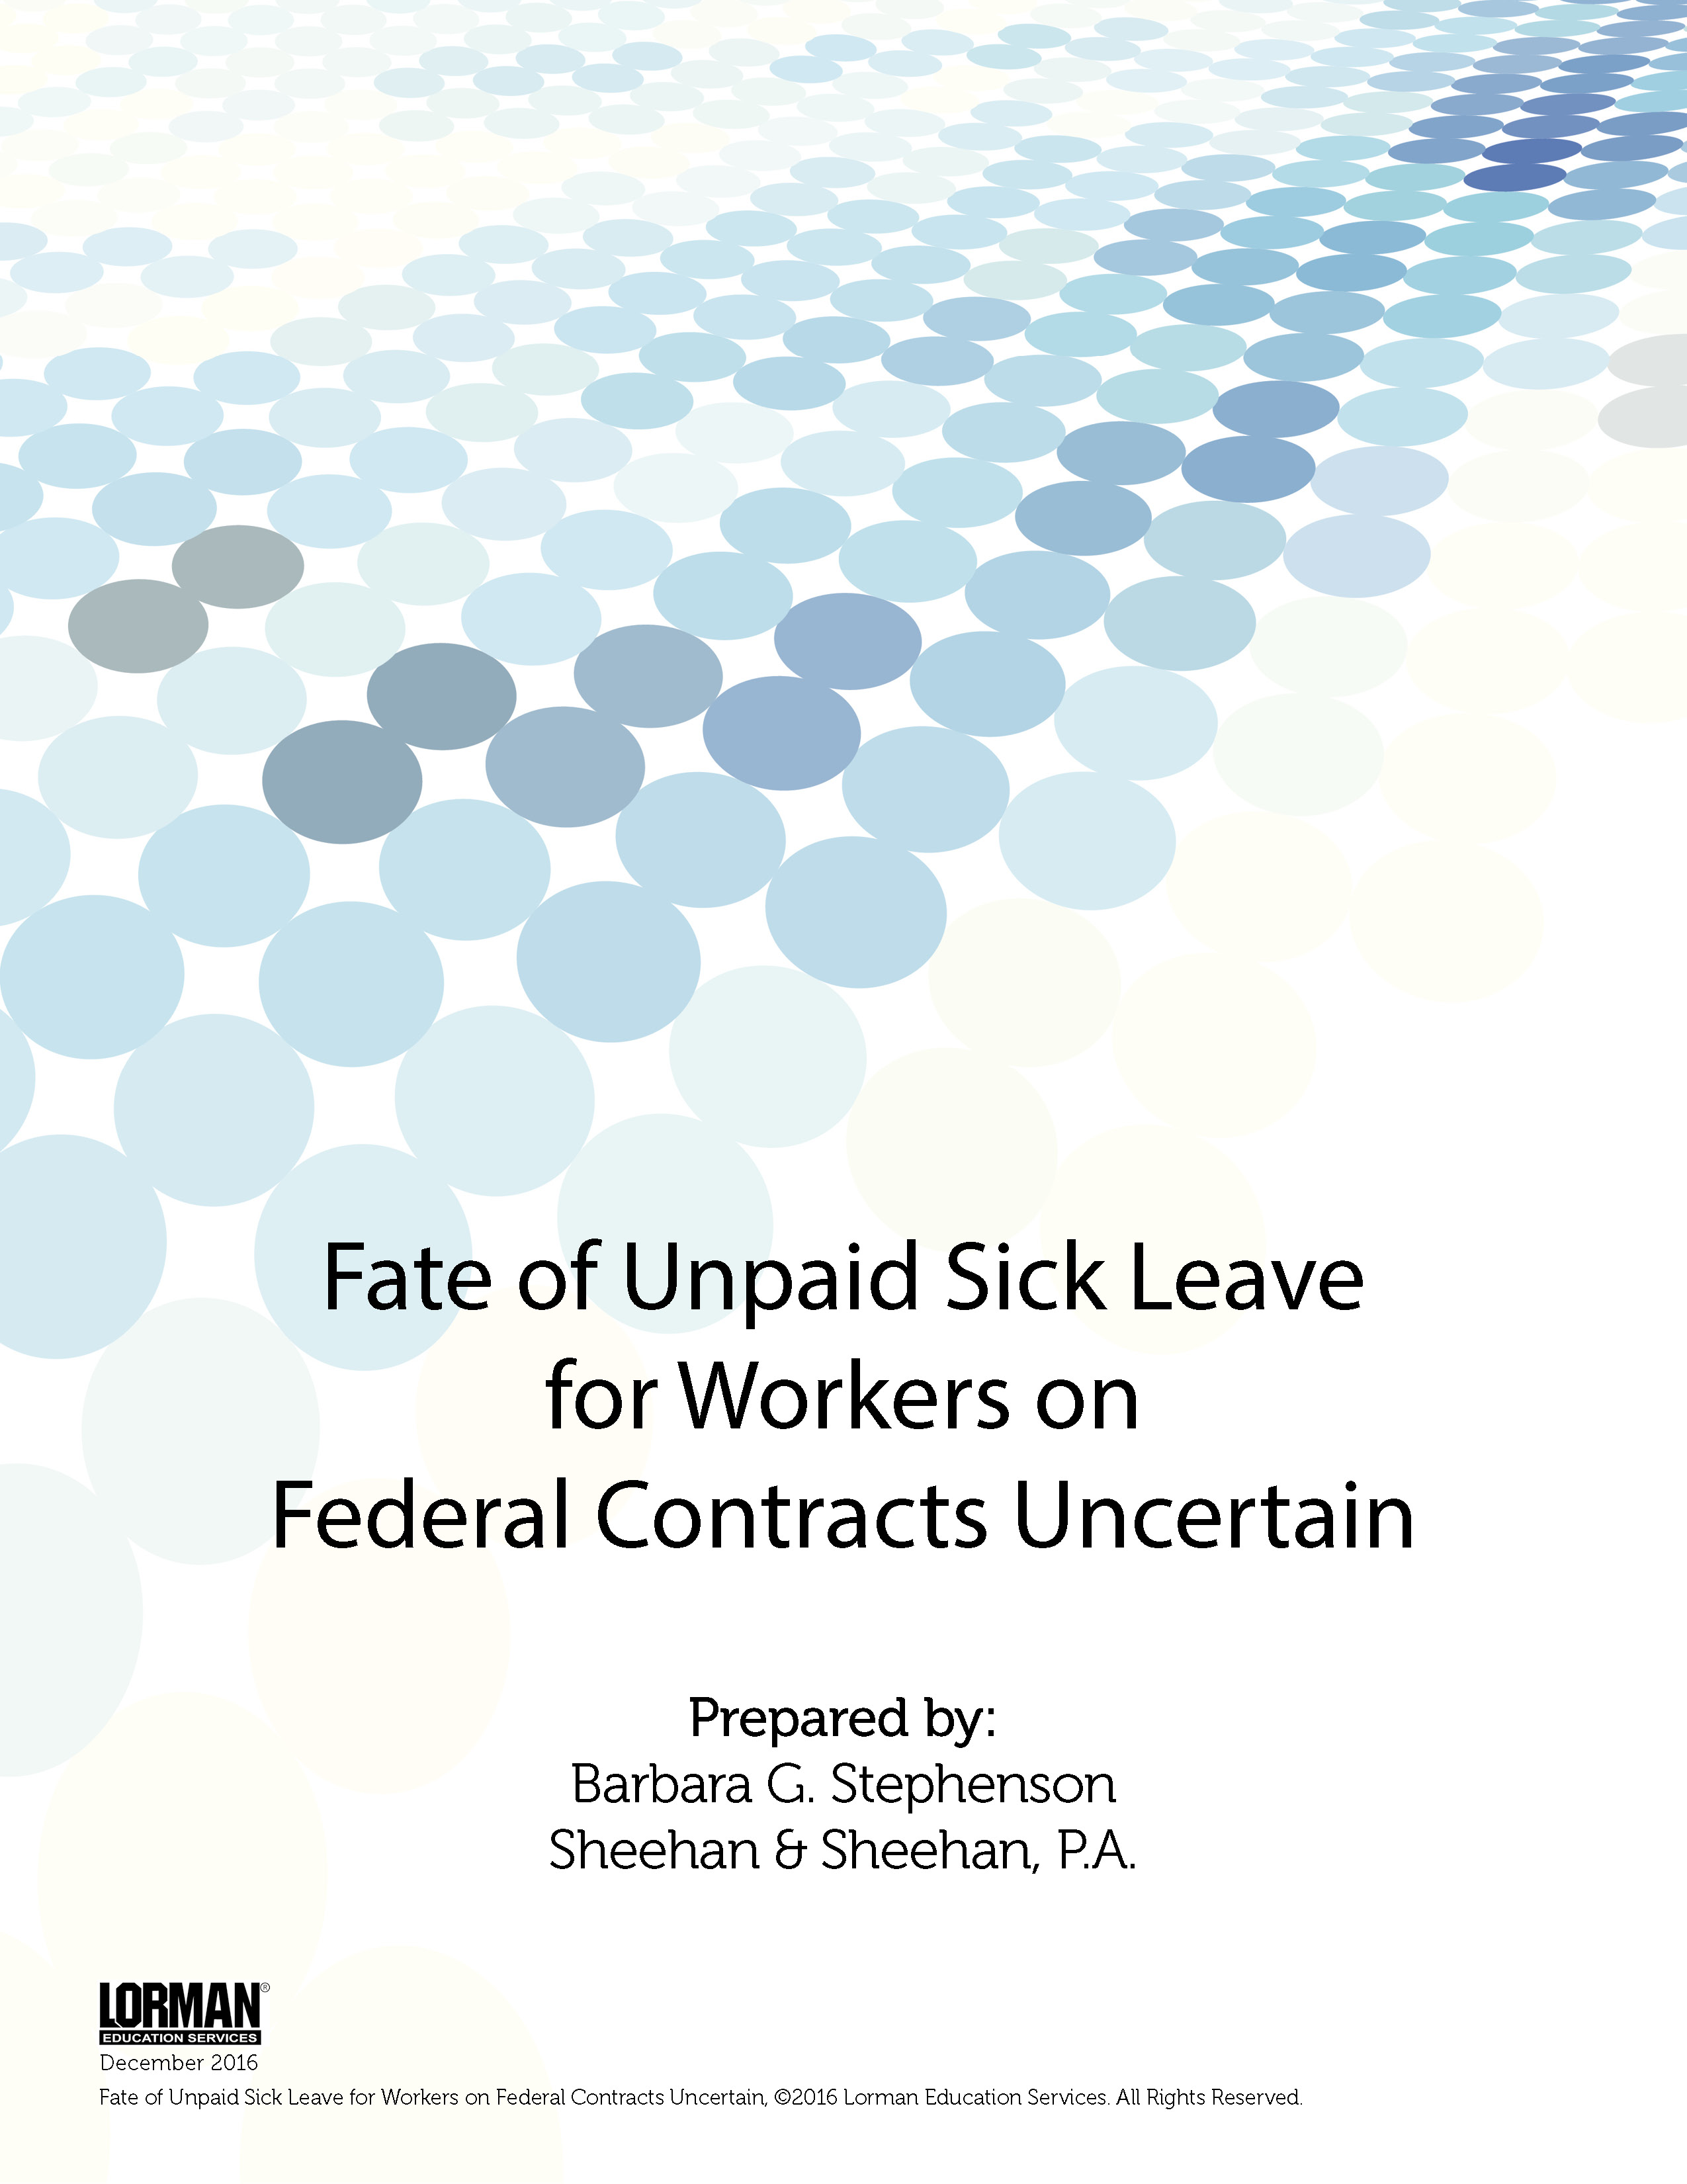 Fate of Unpaid Sick Leave for Workers on Federal Contracts Uncertain